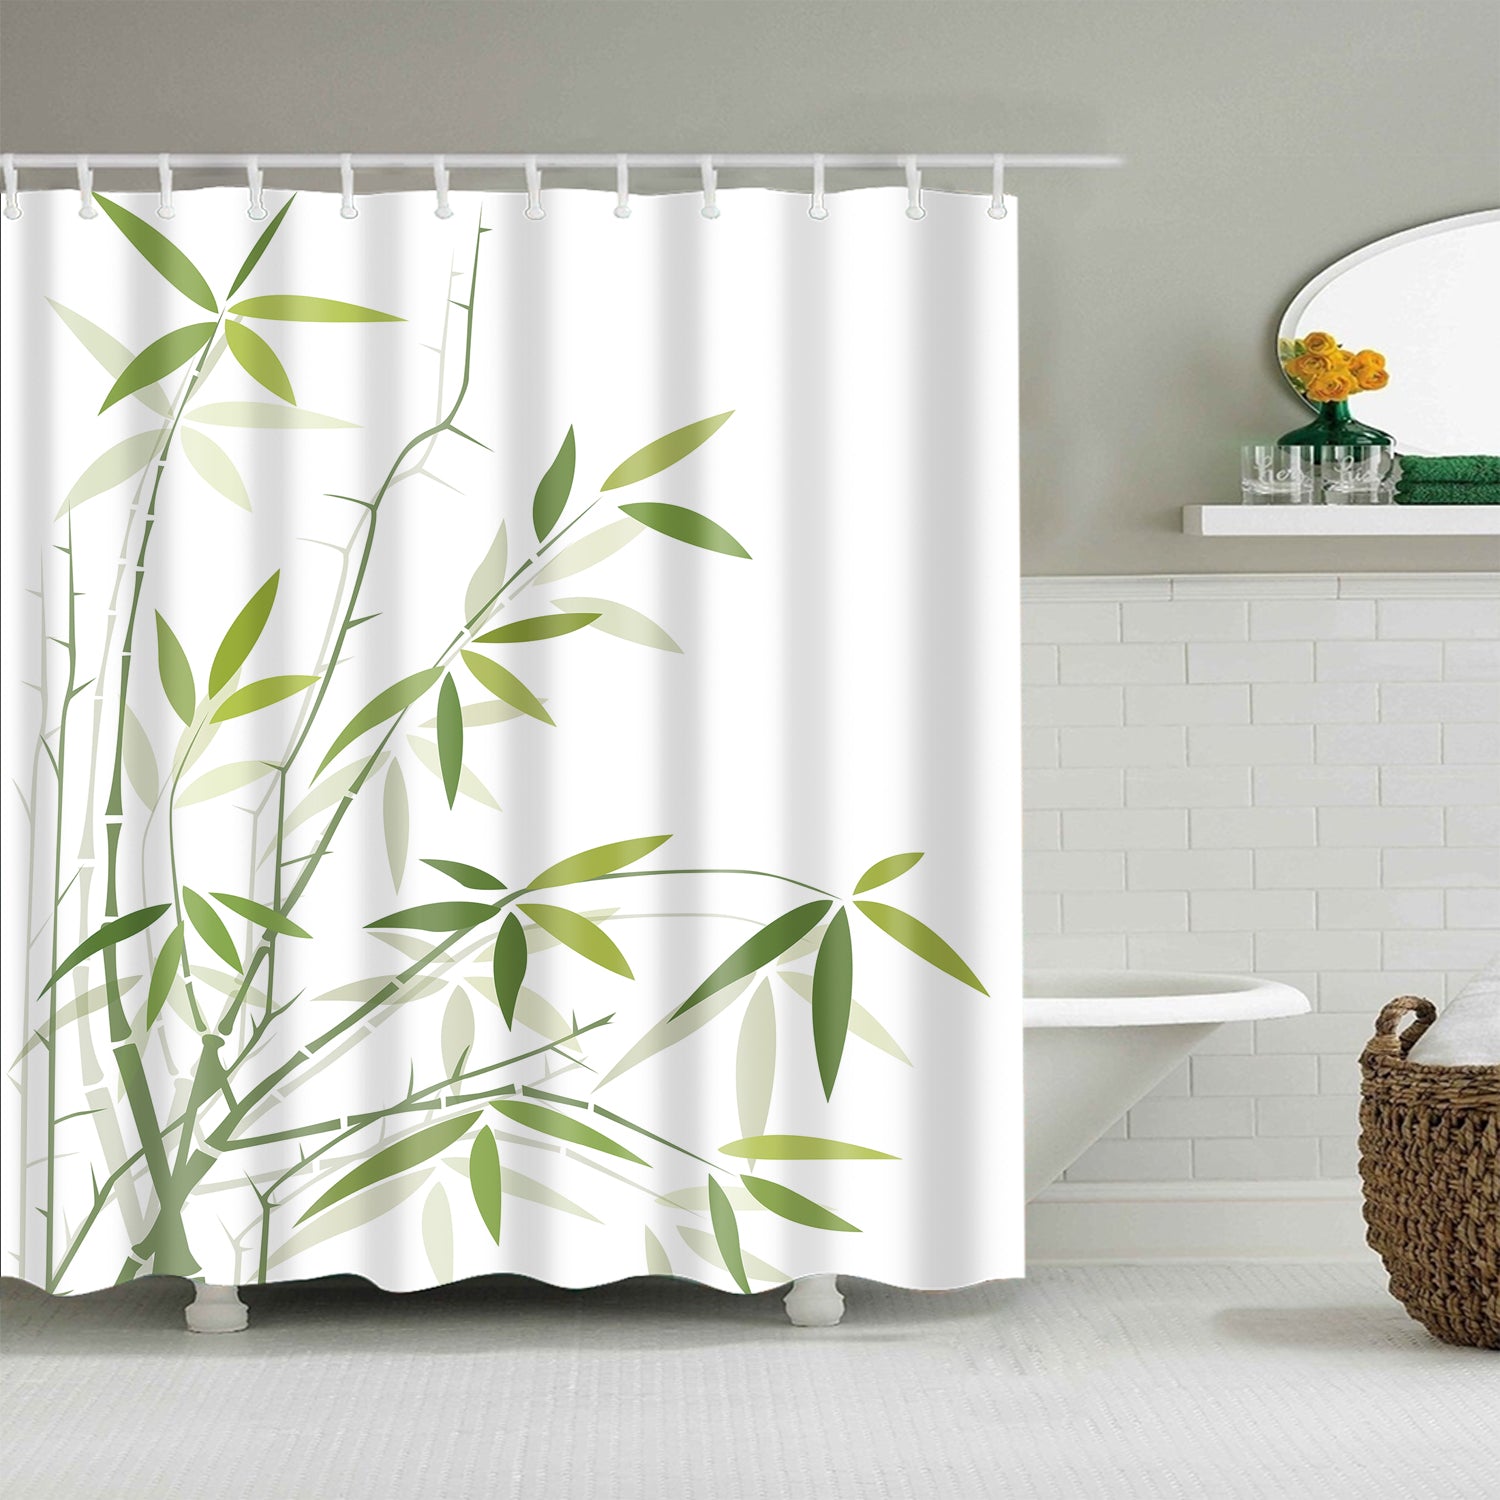 Green White Oriental Bamboo Branches Shower Curtain